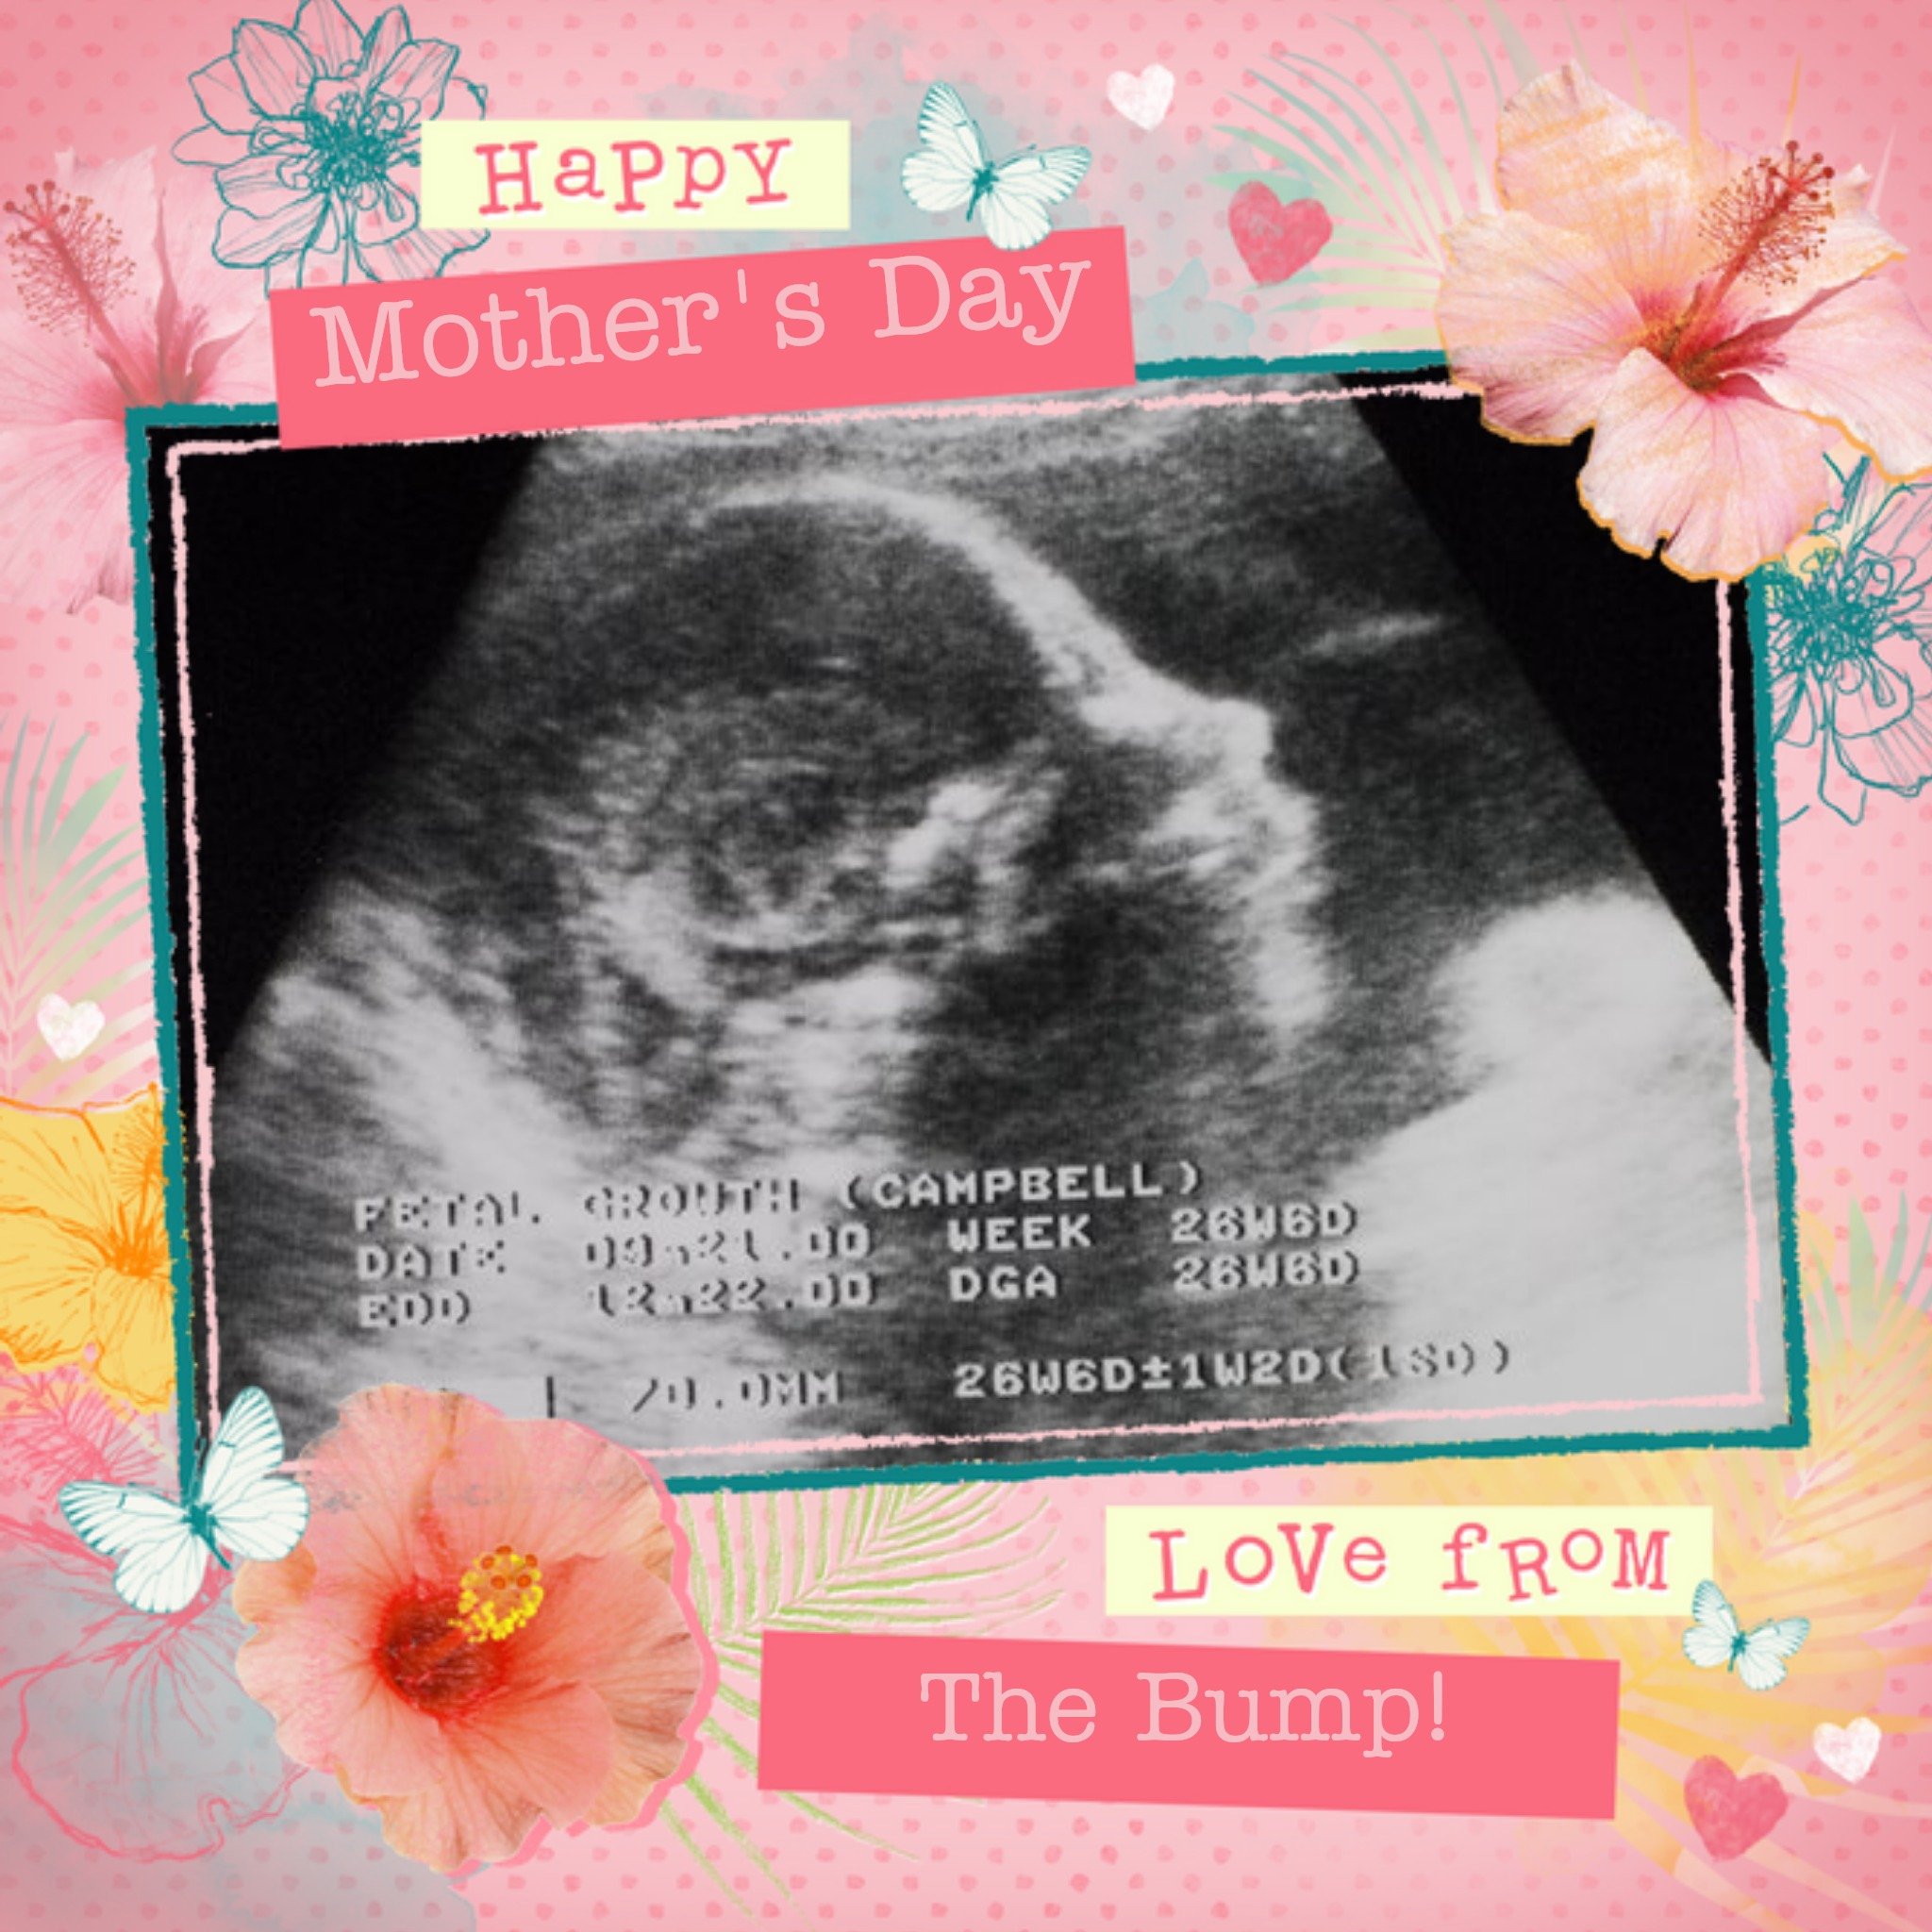 Moonpig Mother's Day Card - Photo Upload Ultrasound Card - From The Bump, Square